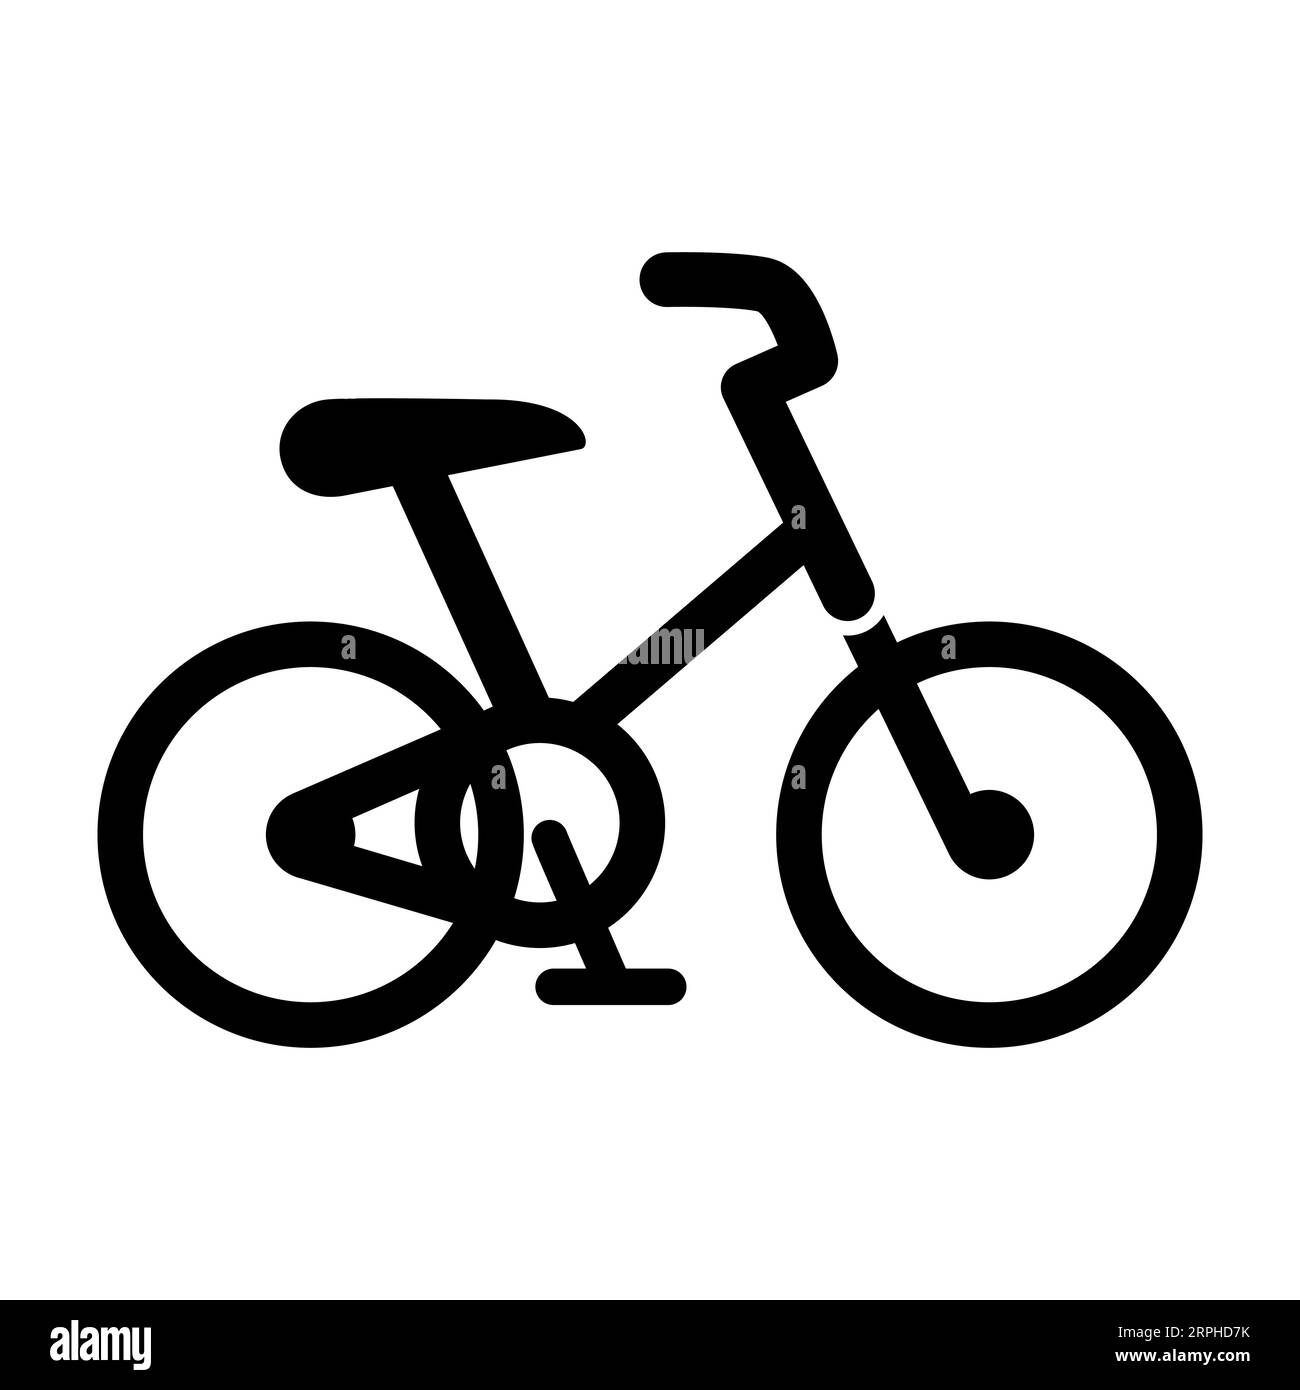 Vector Black Bicycle Icon. Simple Minimalistic Vector Bike Icon. Cycling Sign, Bicycle Shape. Trendy Flat Bike Design Elements for Logo, Web, Social Stock Vector